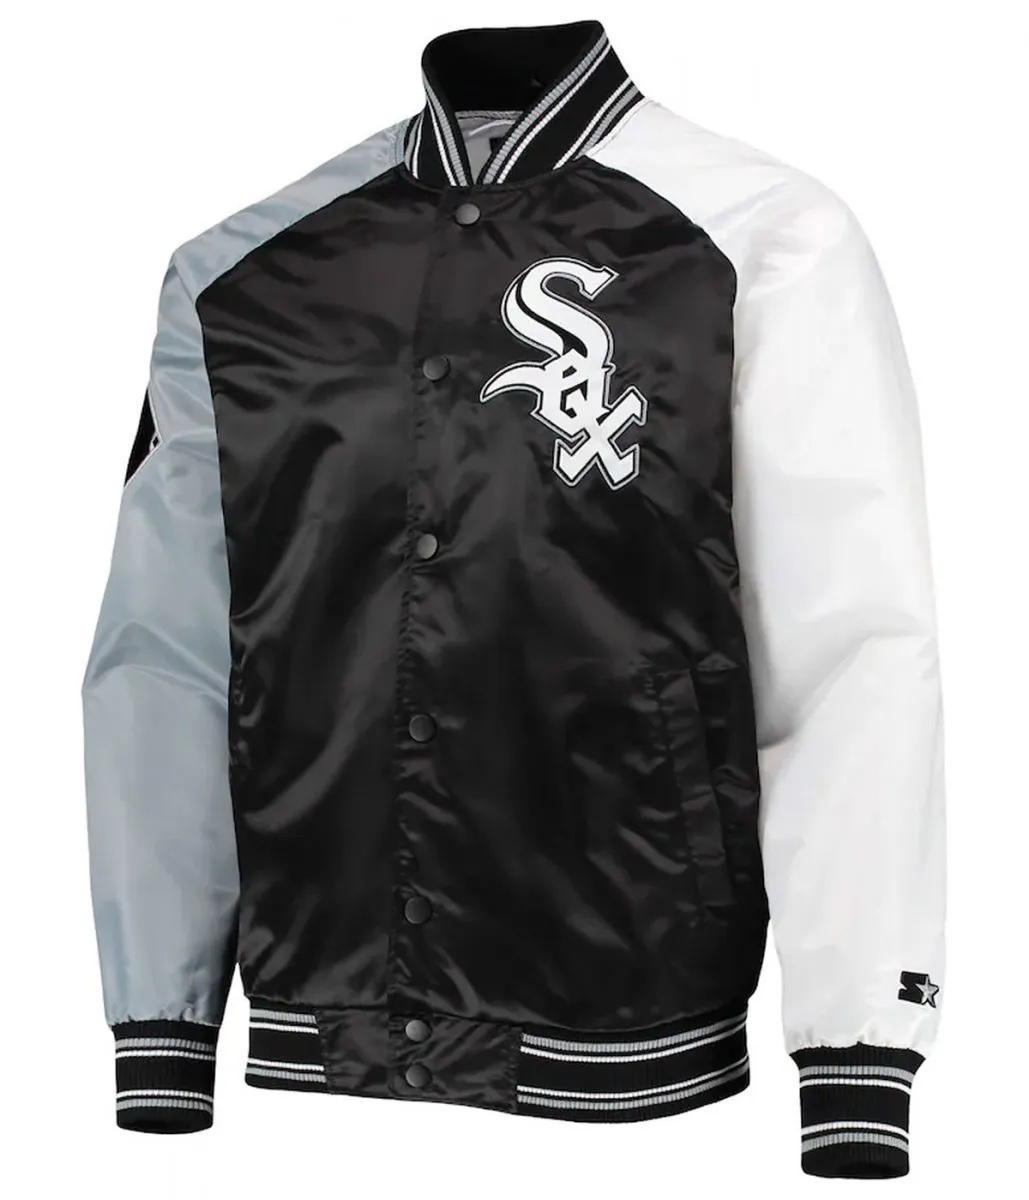 Chicago White Sox Reliever Raglan Full-Snap Jacket